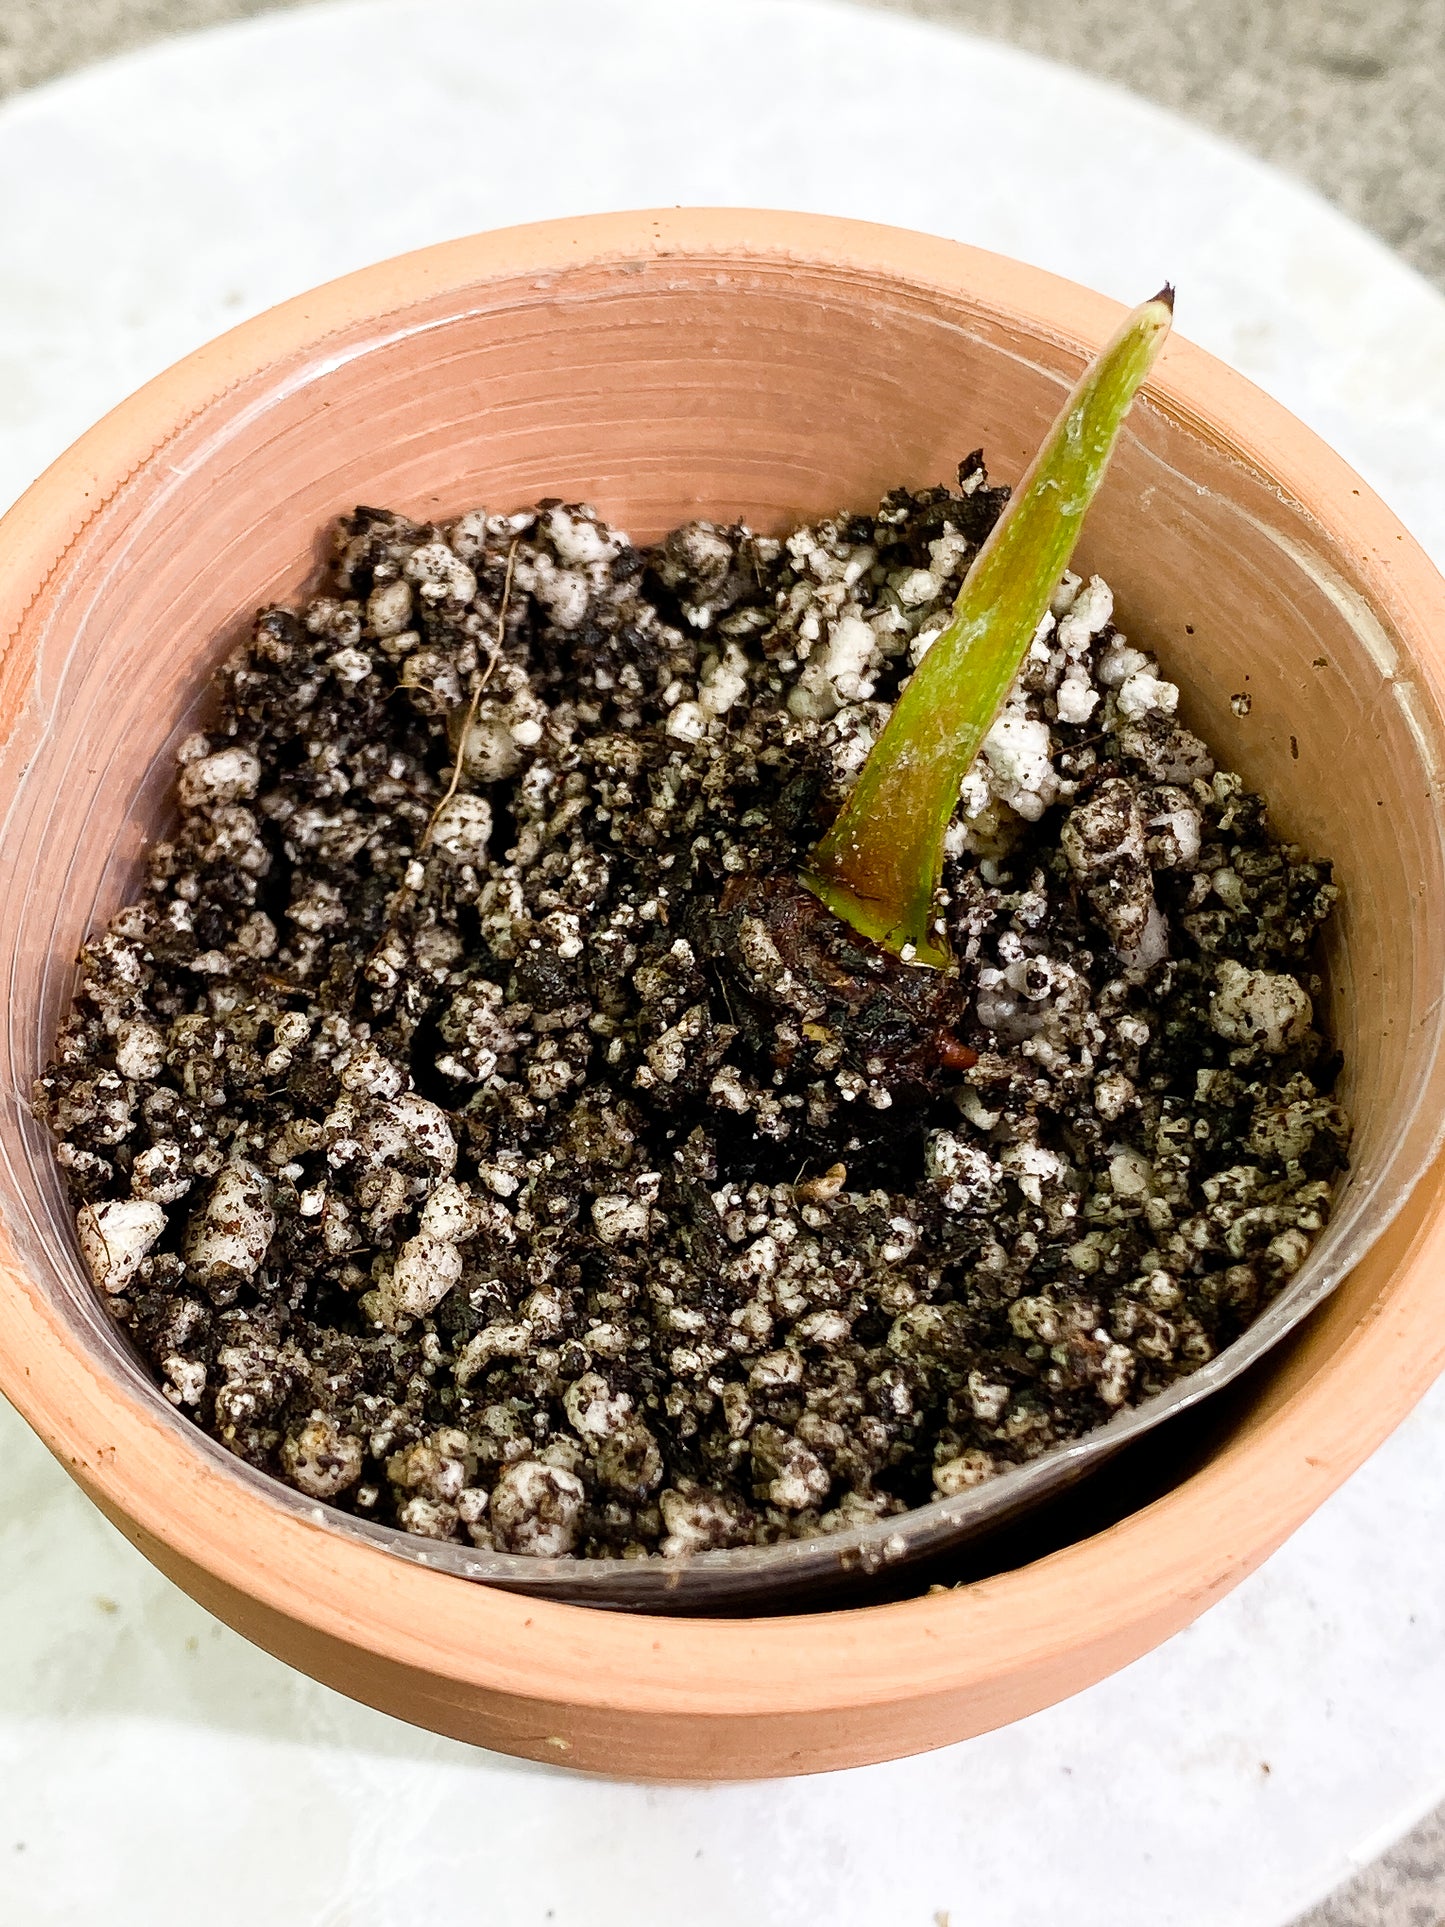 Combo sprout: 1 Philodendron Plowmanii Rooting sprout and 1 Rooting paraiso verde sprout